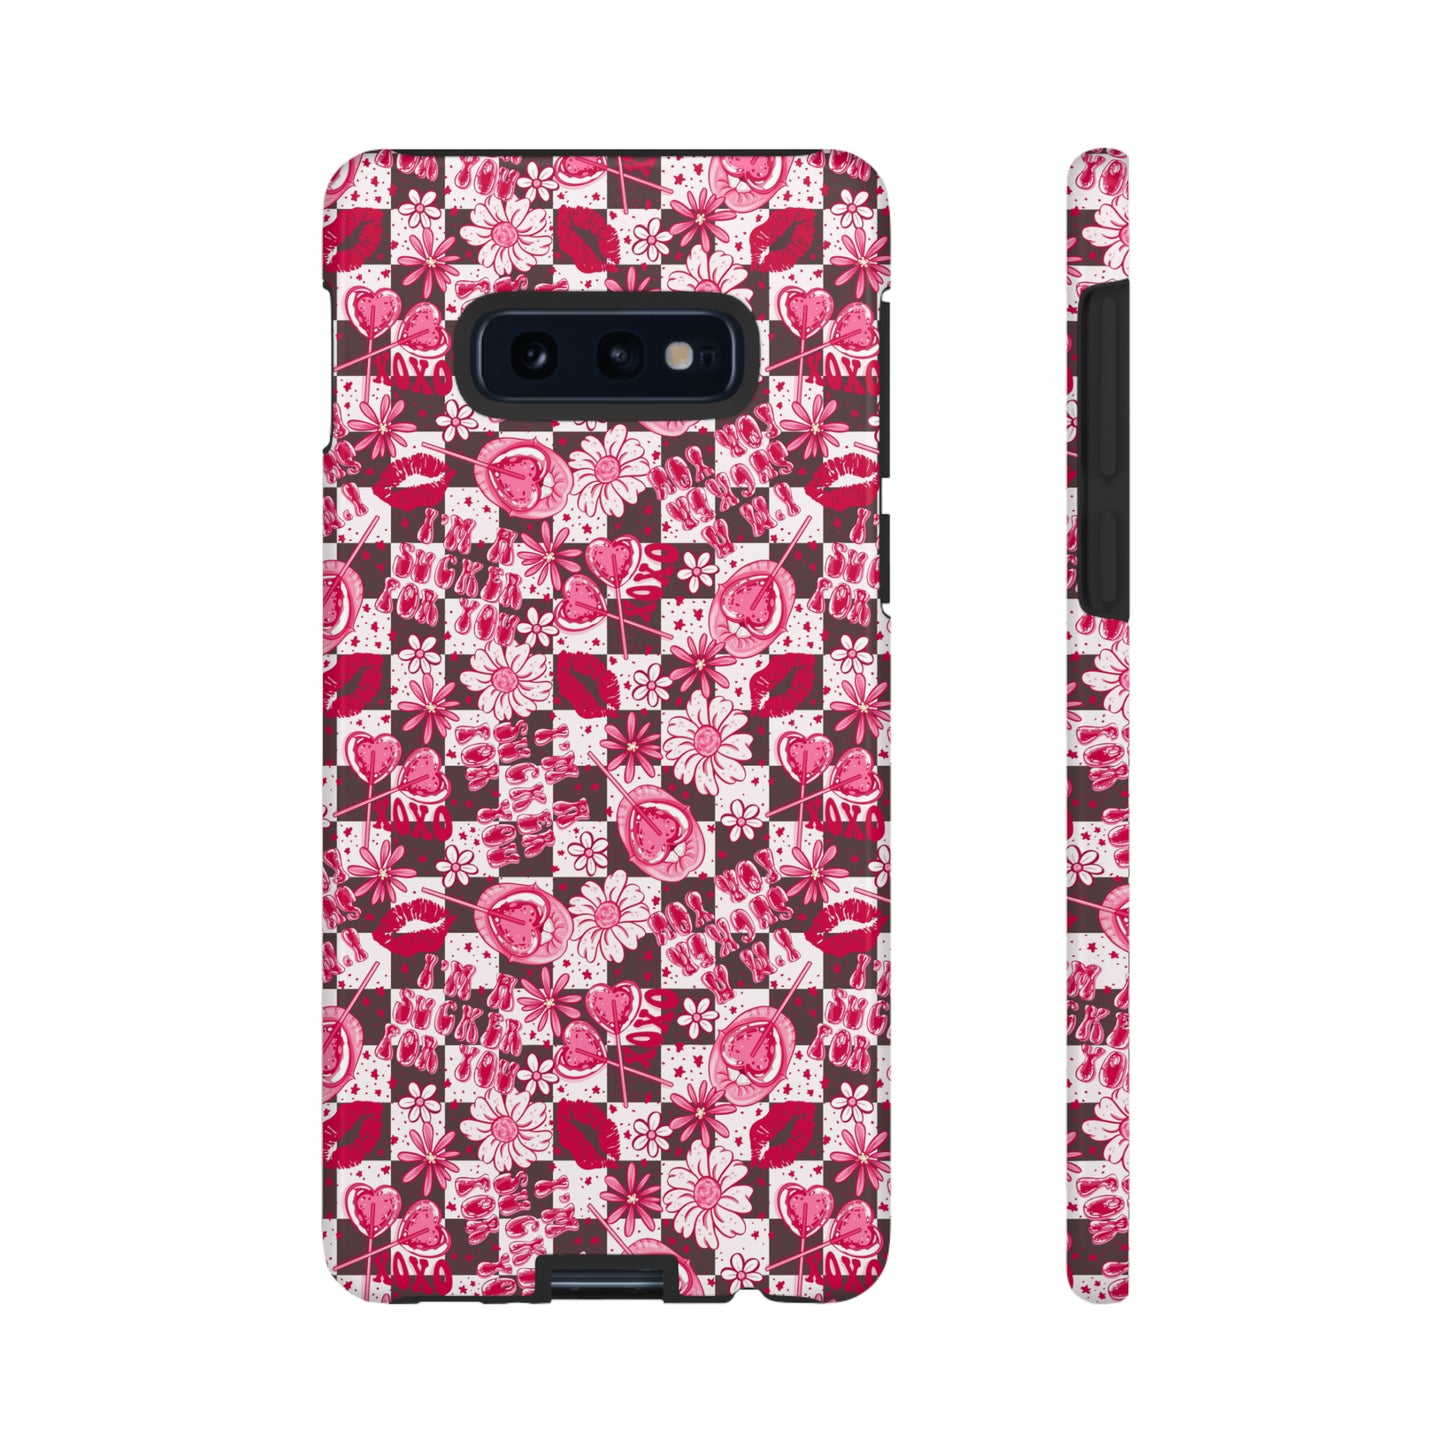 Im a Sucker for You Tough Phone Case for Iphones, Samsungs, and Google phones